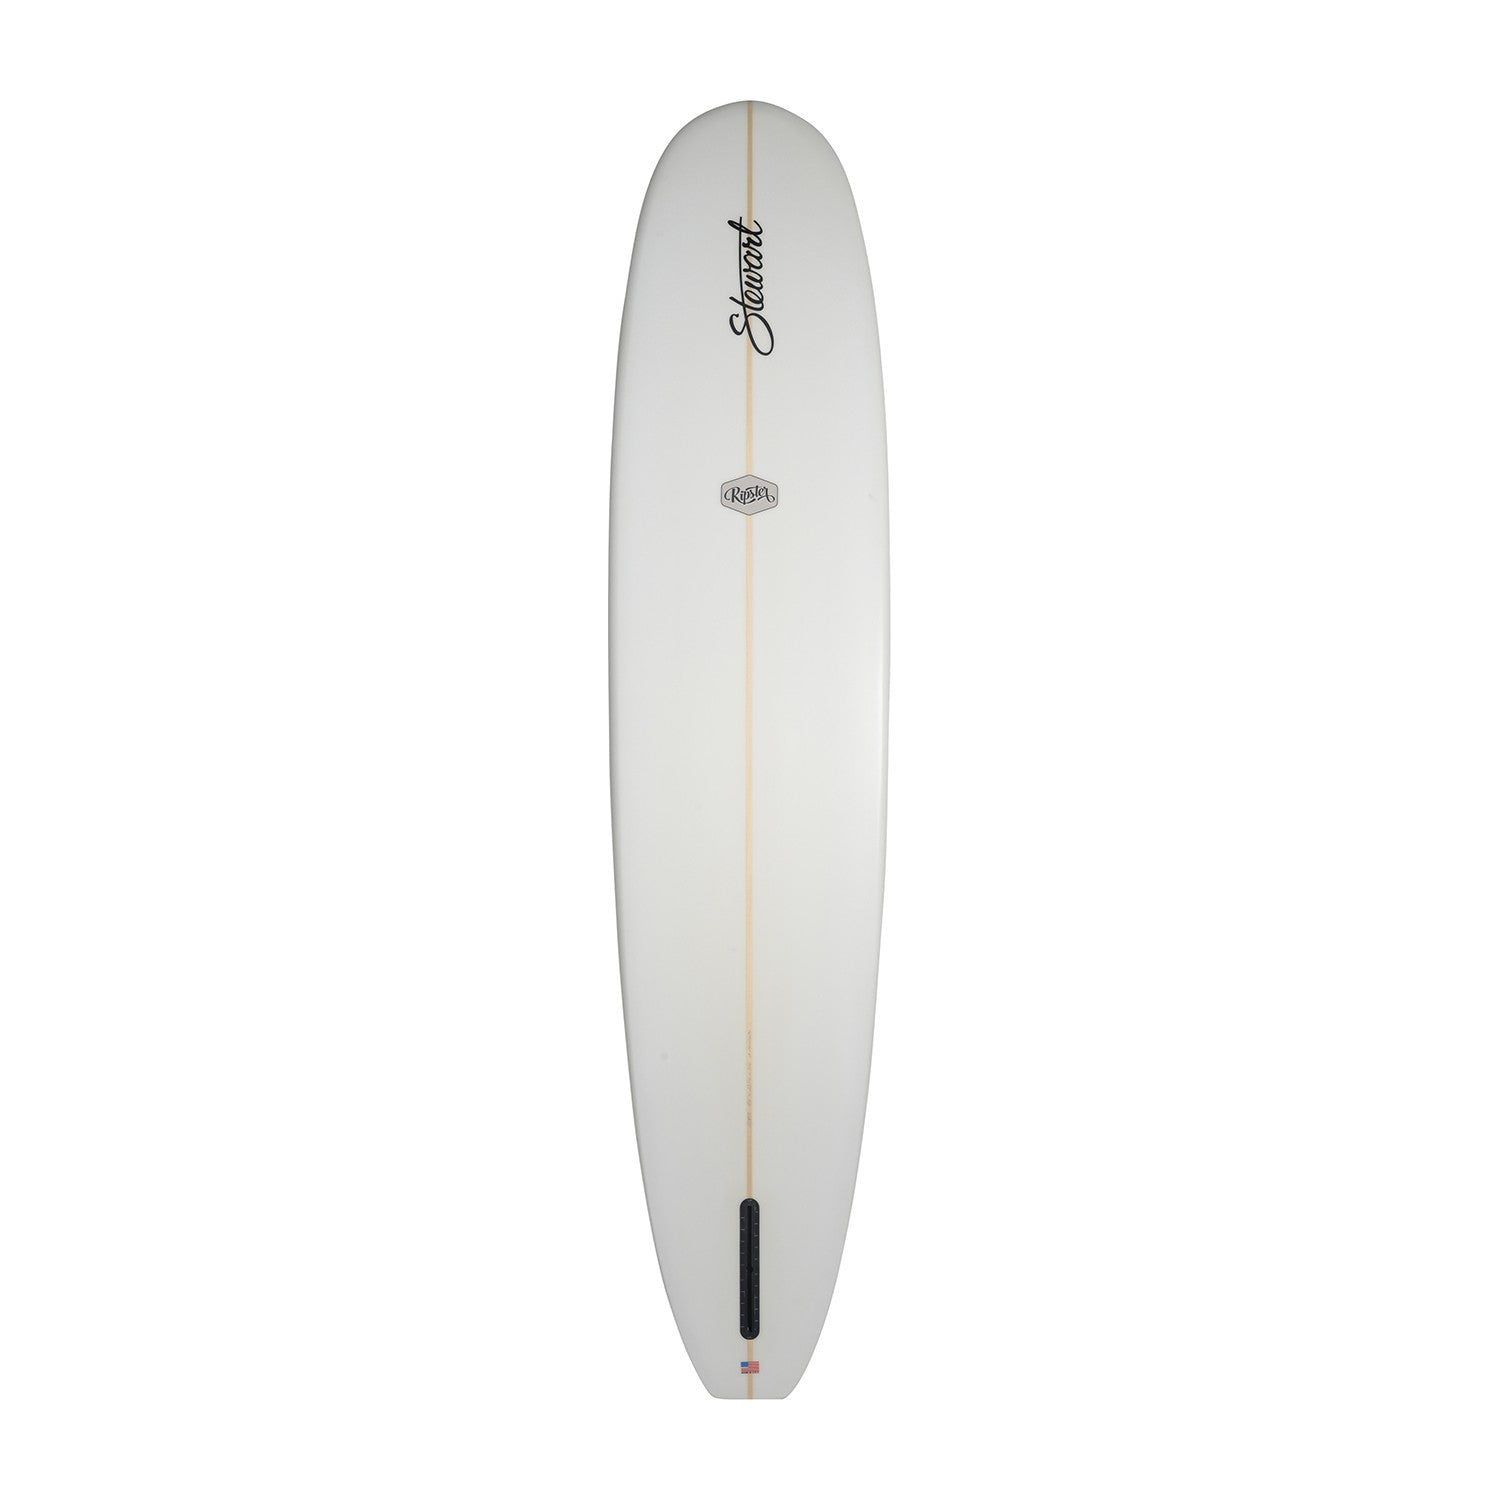 STEWART Surfboards - Ripster 9'4 (PU) - Clear